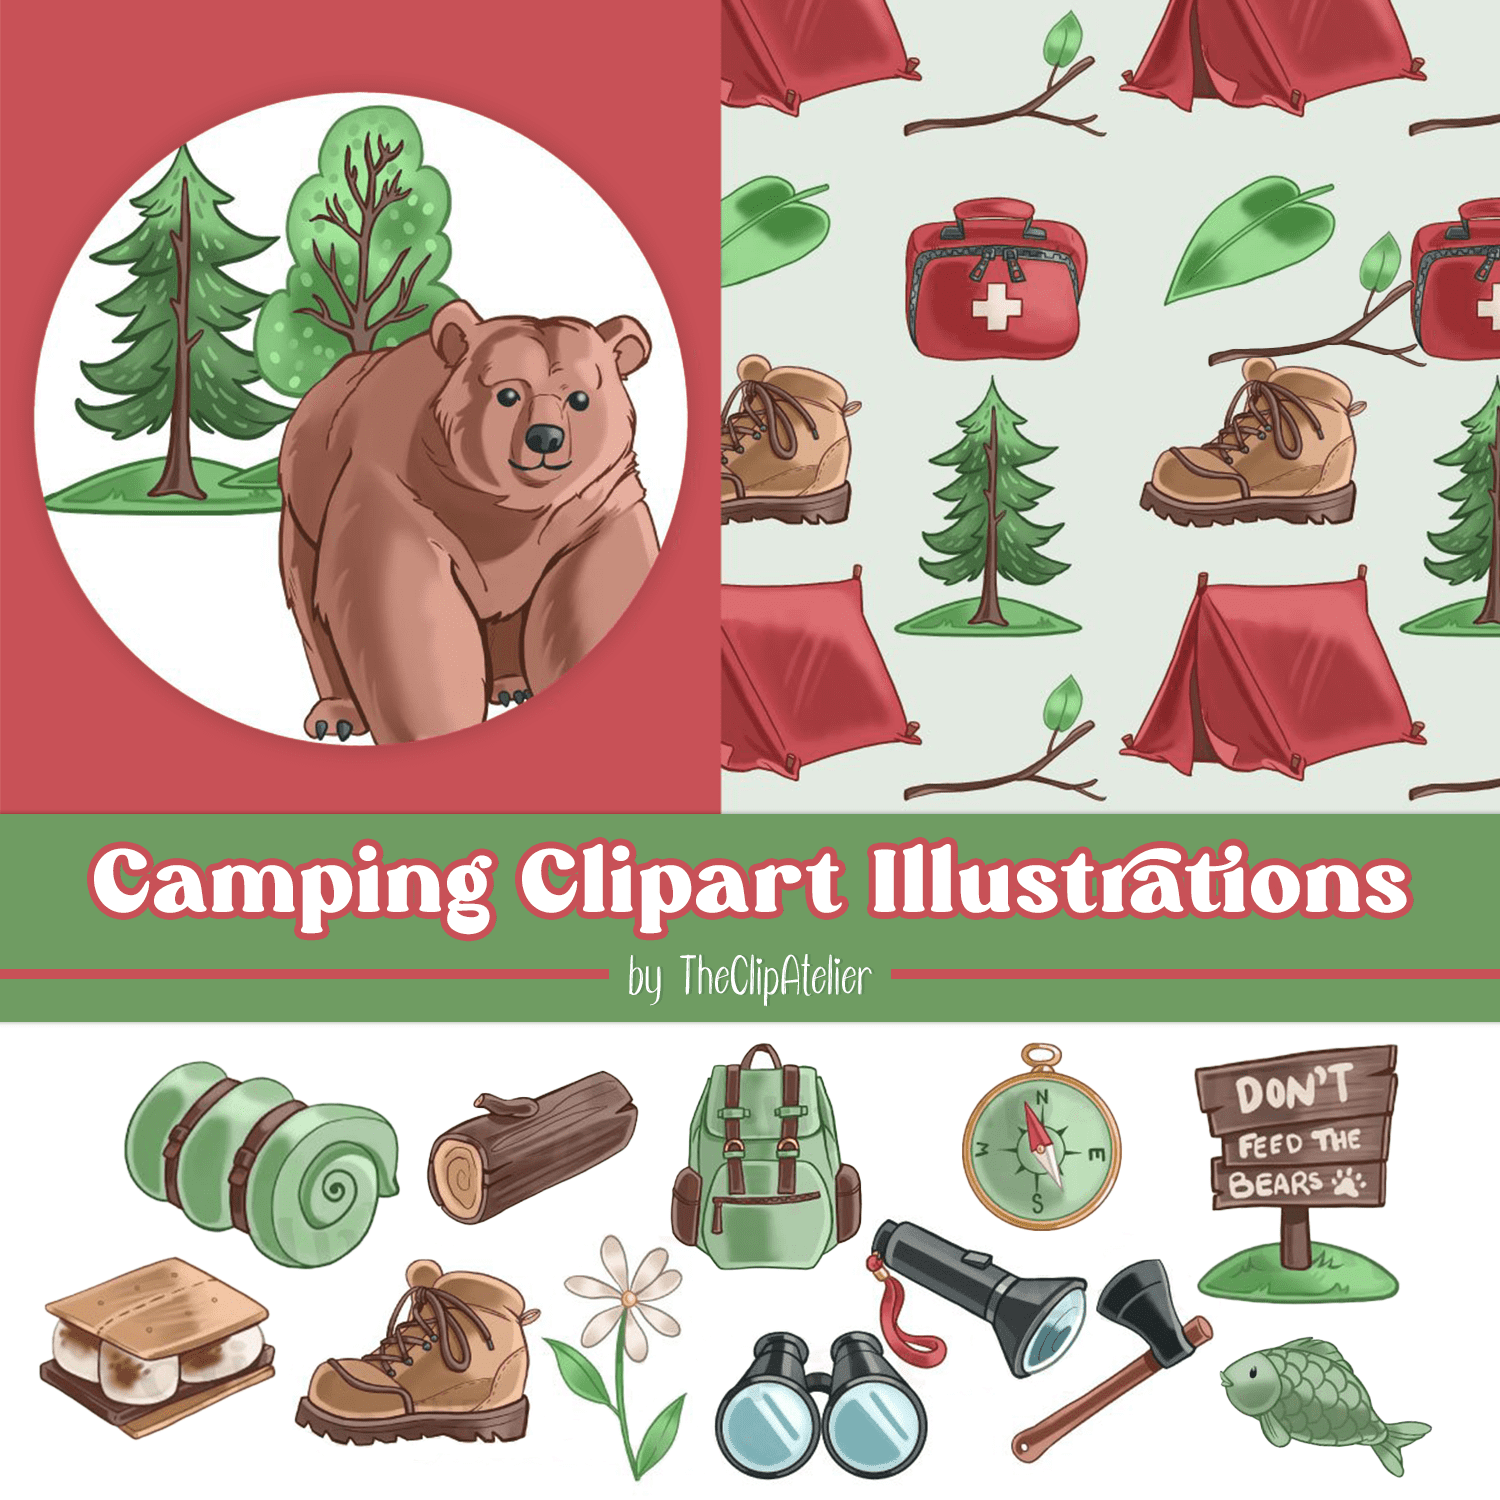 Camping Clipart Illustrations created by TheClipAtelier.